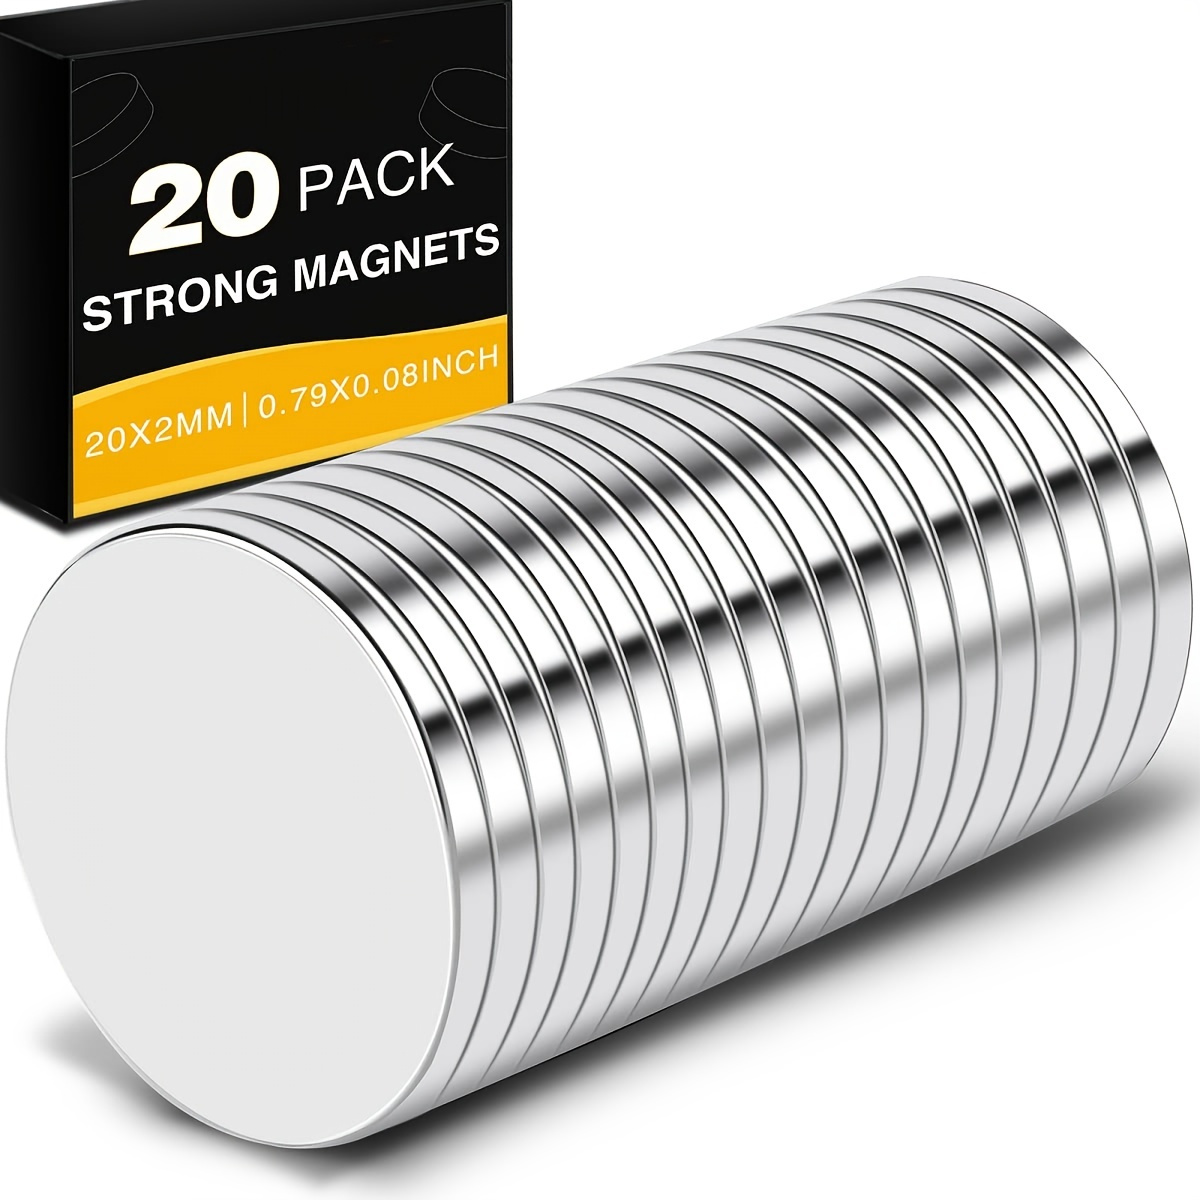 Buy Neodymium Magnets, Magnets, Set of 300, 3*1mm, Strong, Ultra Small,  Round, Thin Round, Refrigerator Magnets, Office, School, Kitchen Supplies, Neodymium  Magnets, Diss, Molecular Models, Gundam Plastic Models, Perfect for Craft  Models (